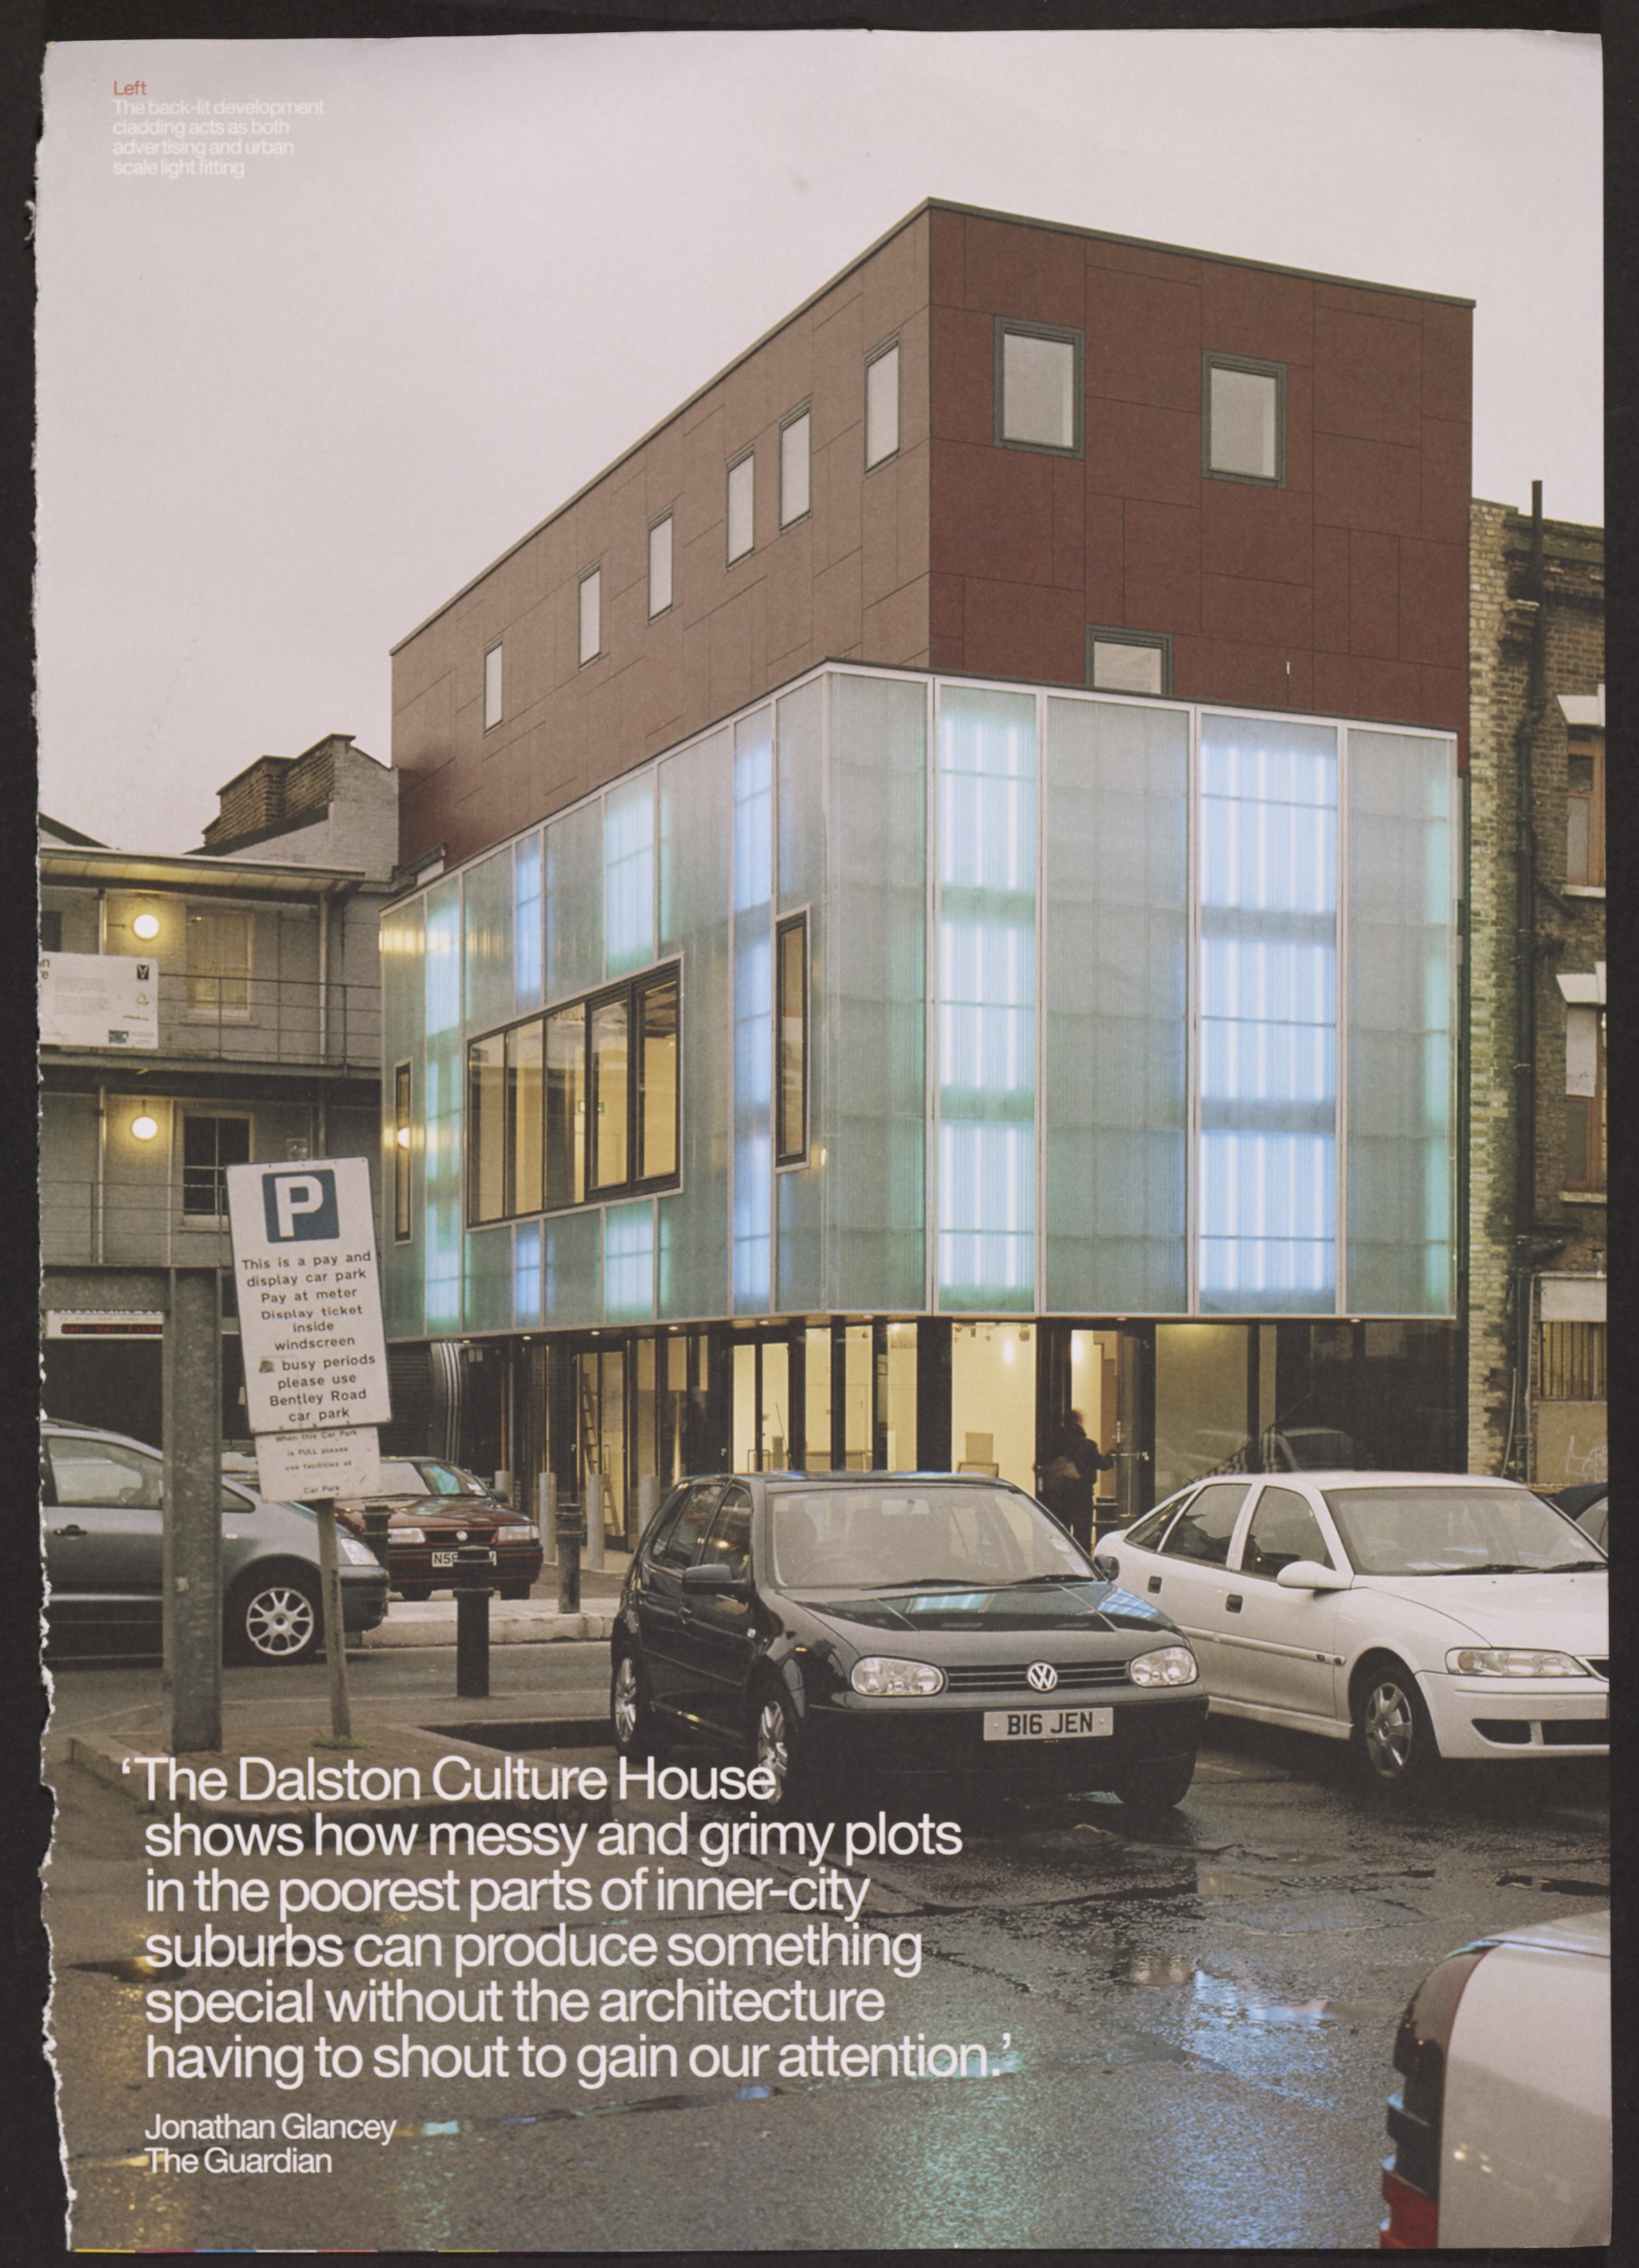 Dalston Culture House designed by Hawkins/Brown